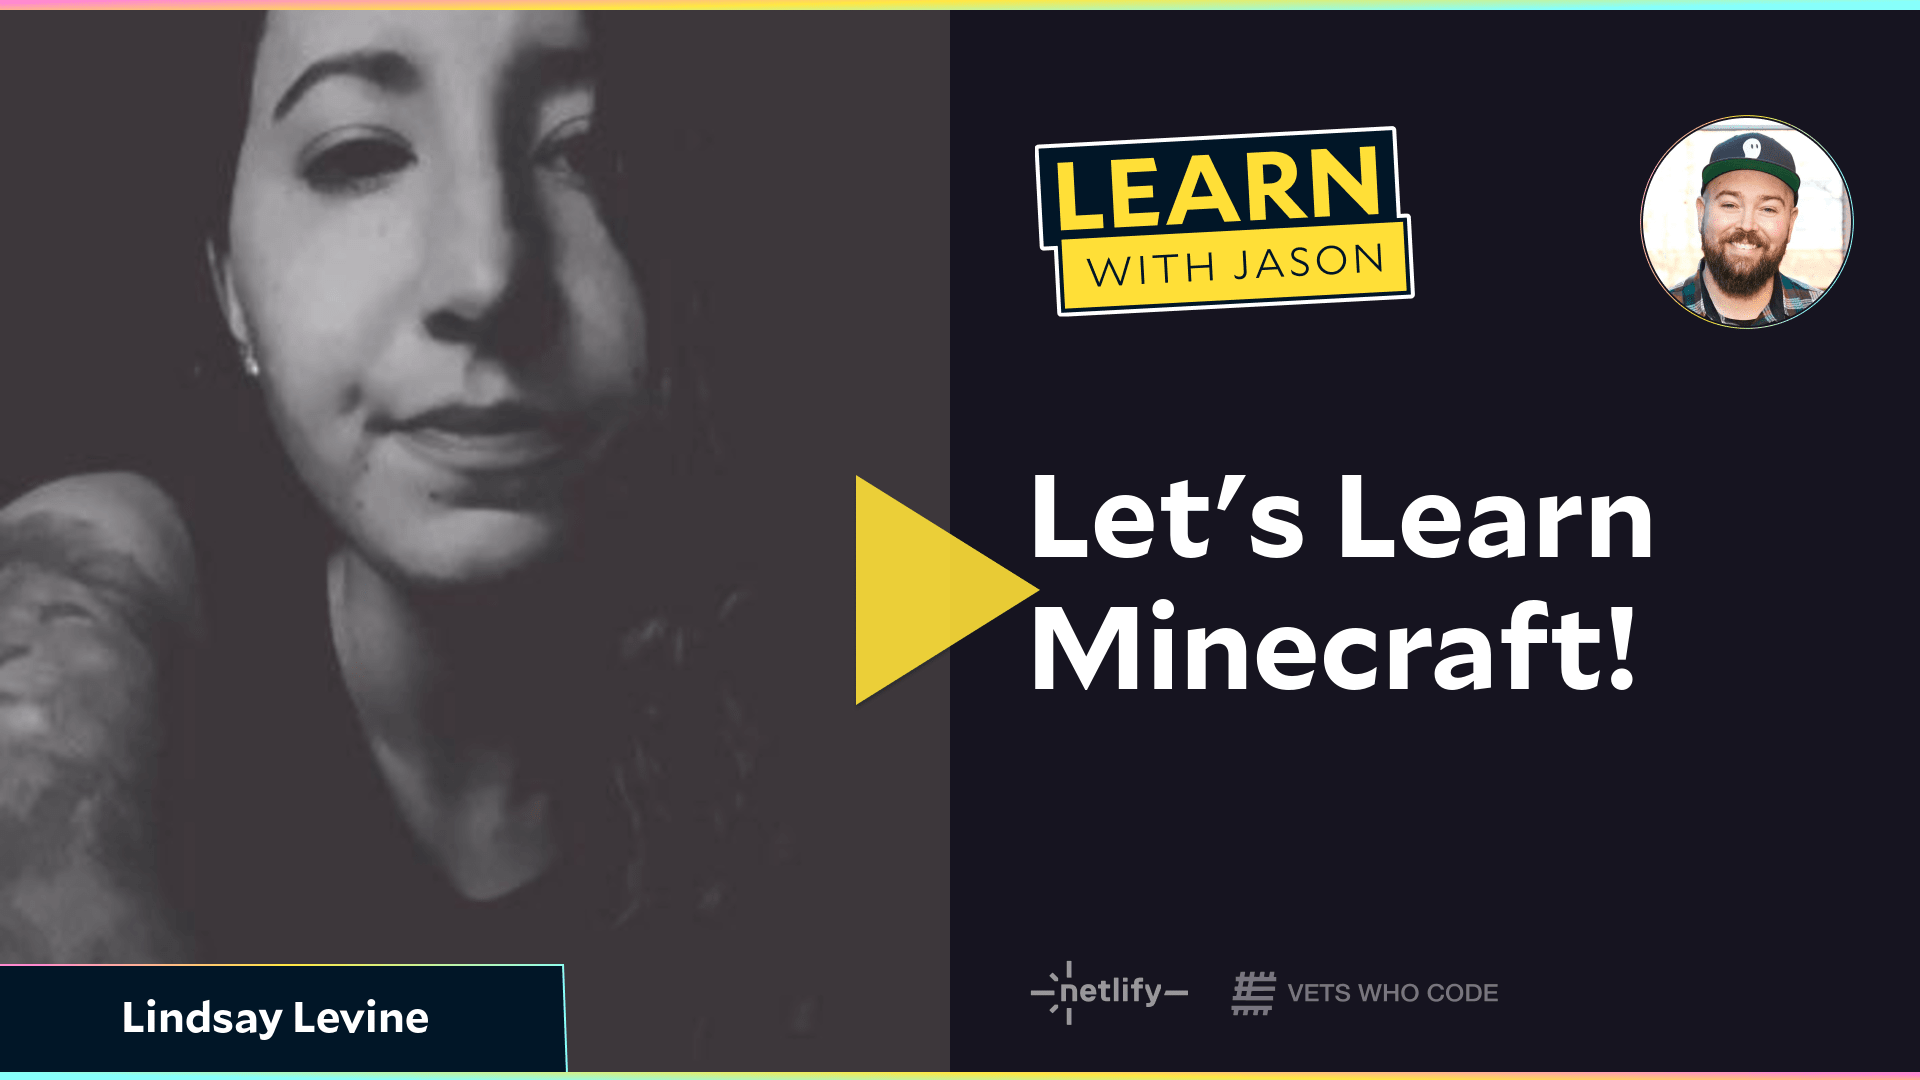 Let's Learn Minecraft! (with Lindsay Levine)